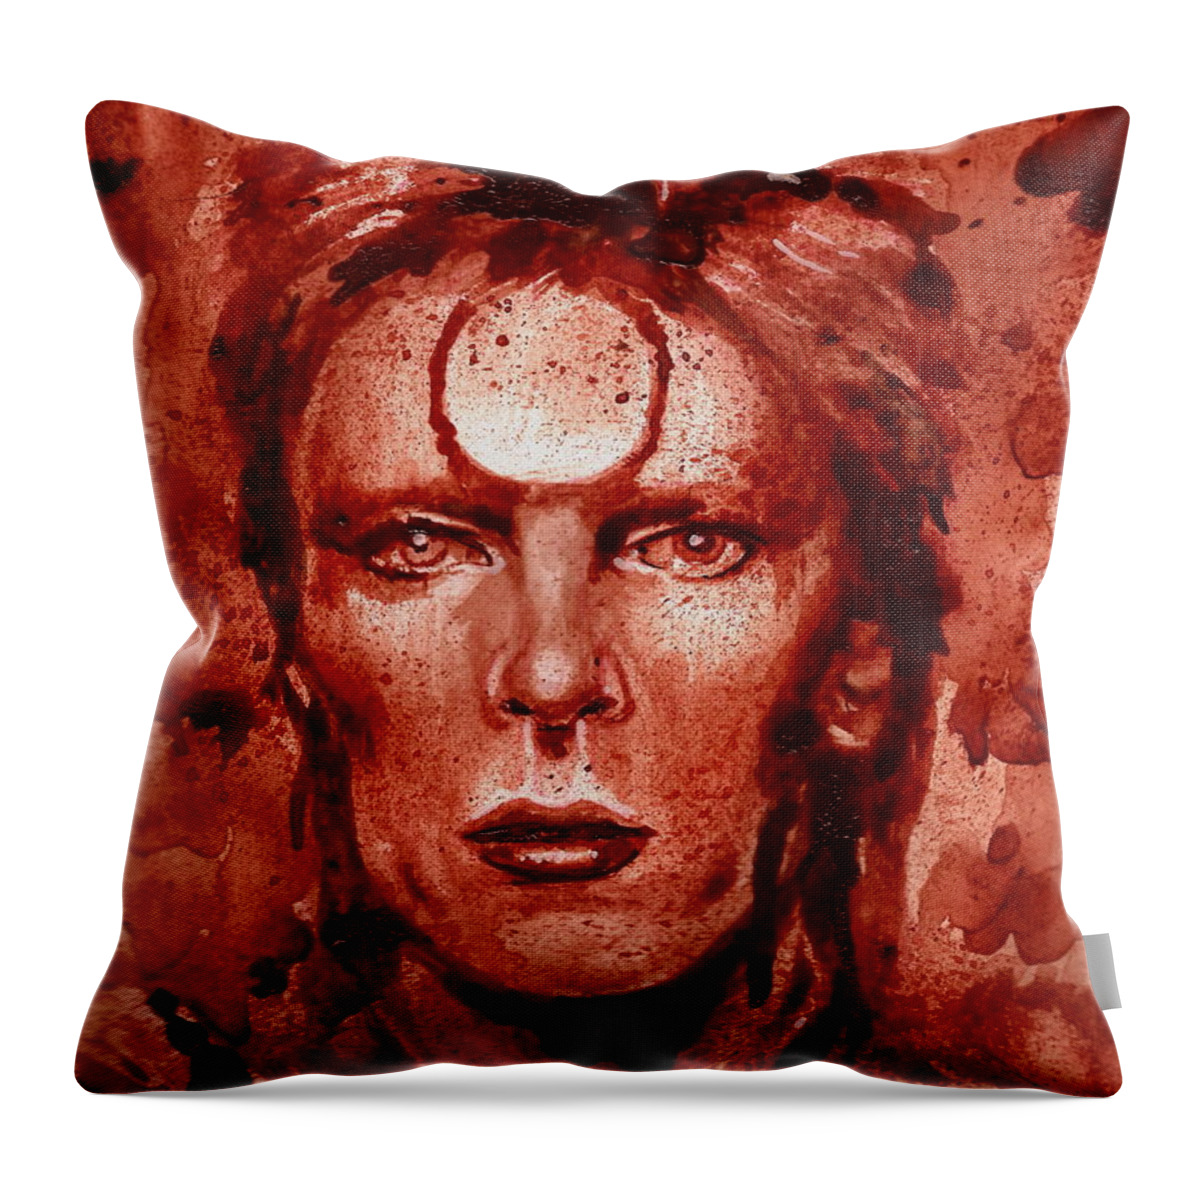 David Bowie Throw Pillow featuring the painting Ziggy Stardust / David Bowie by Ryan Almighty